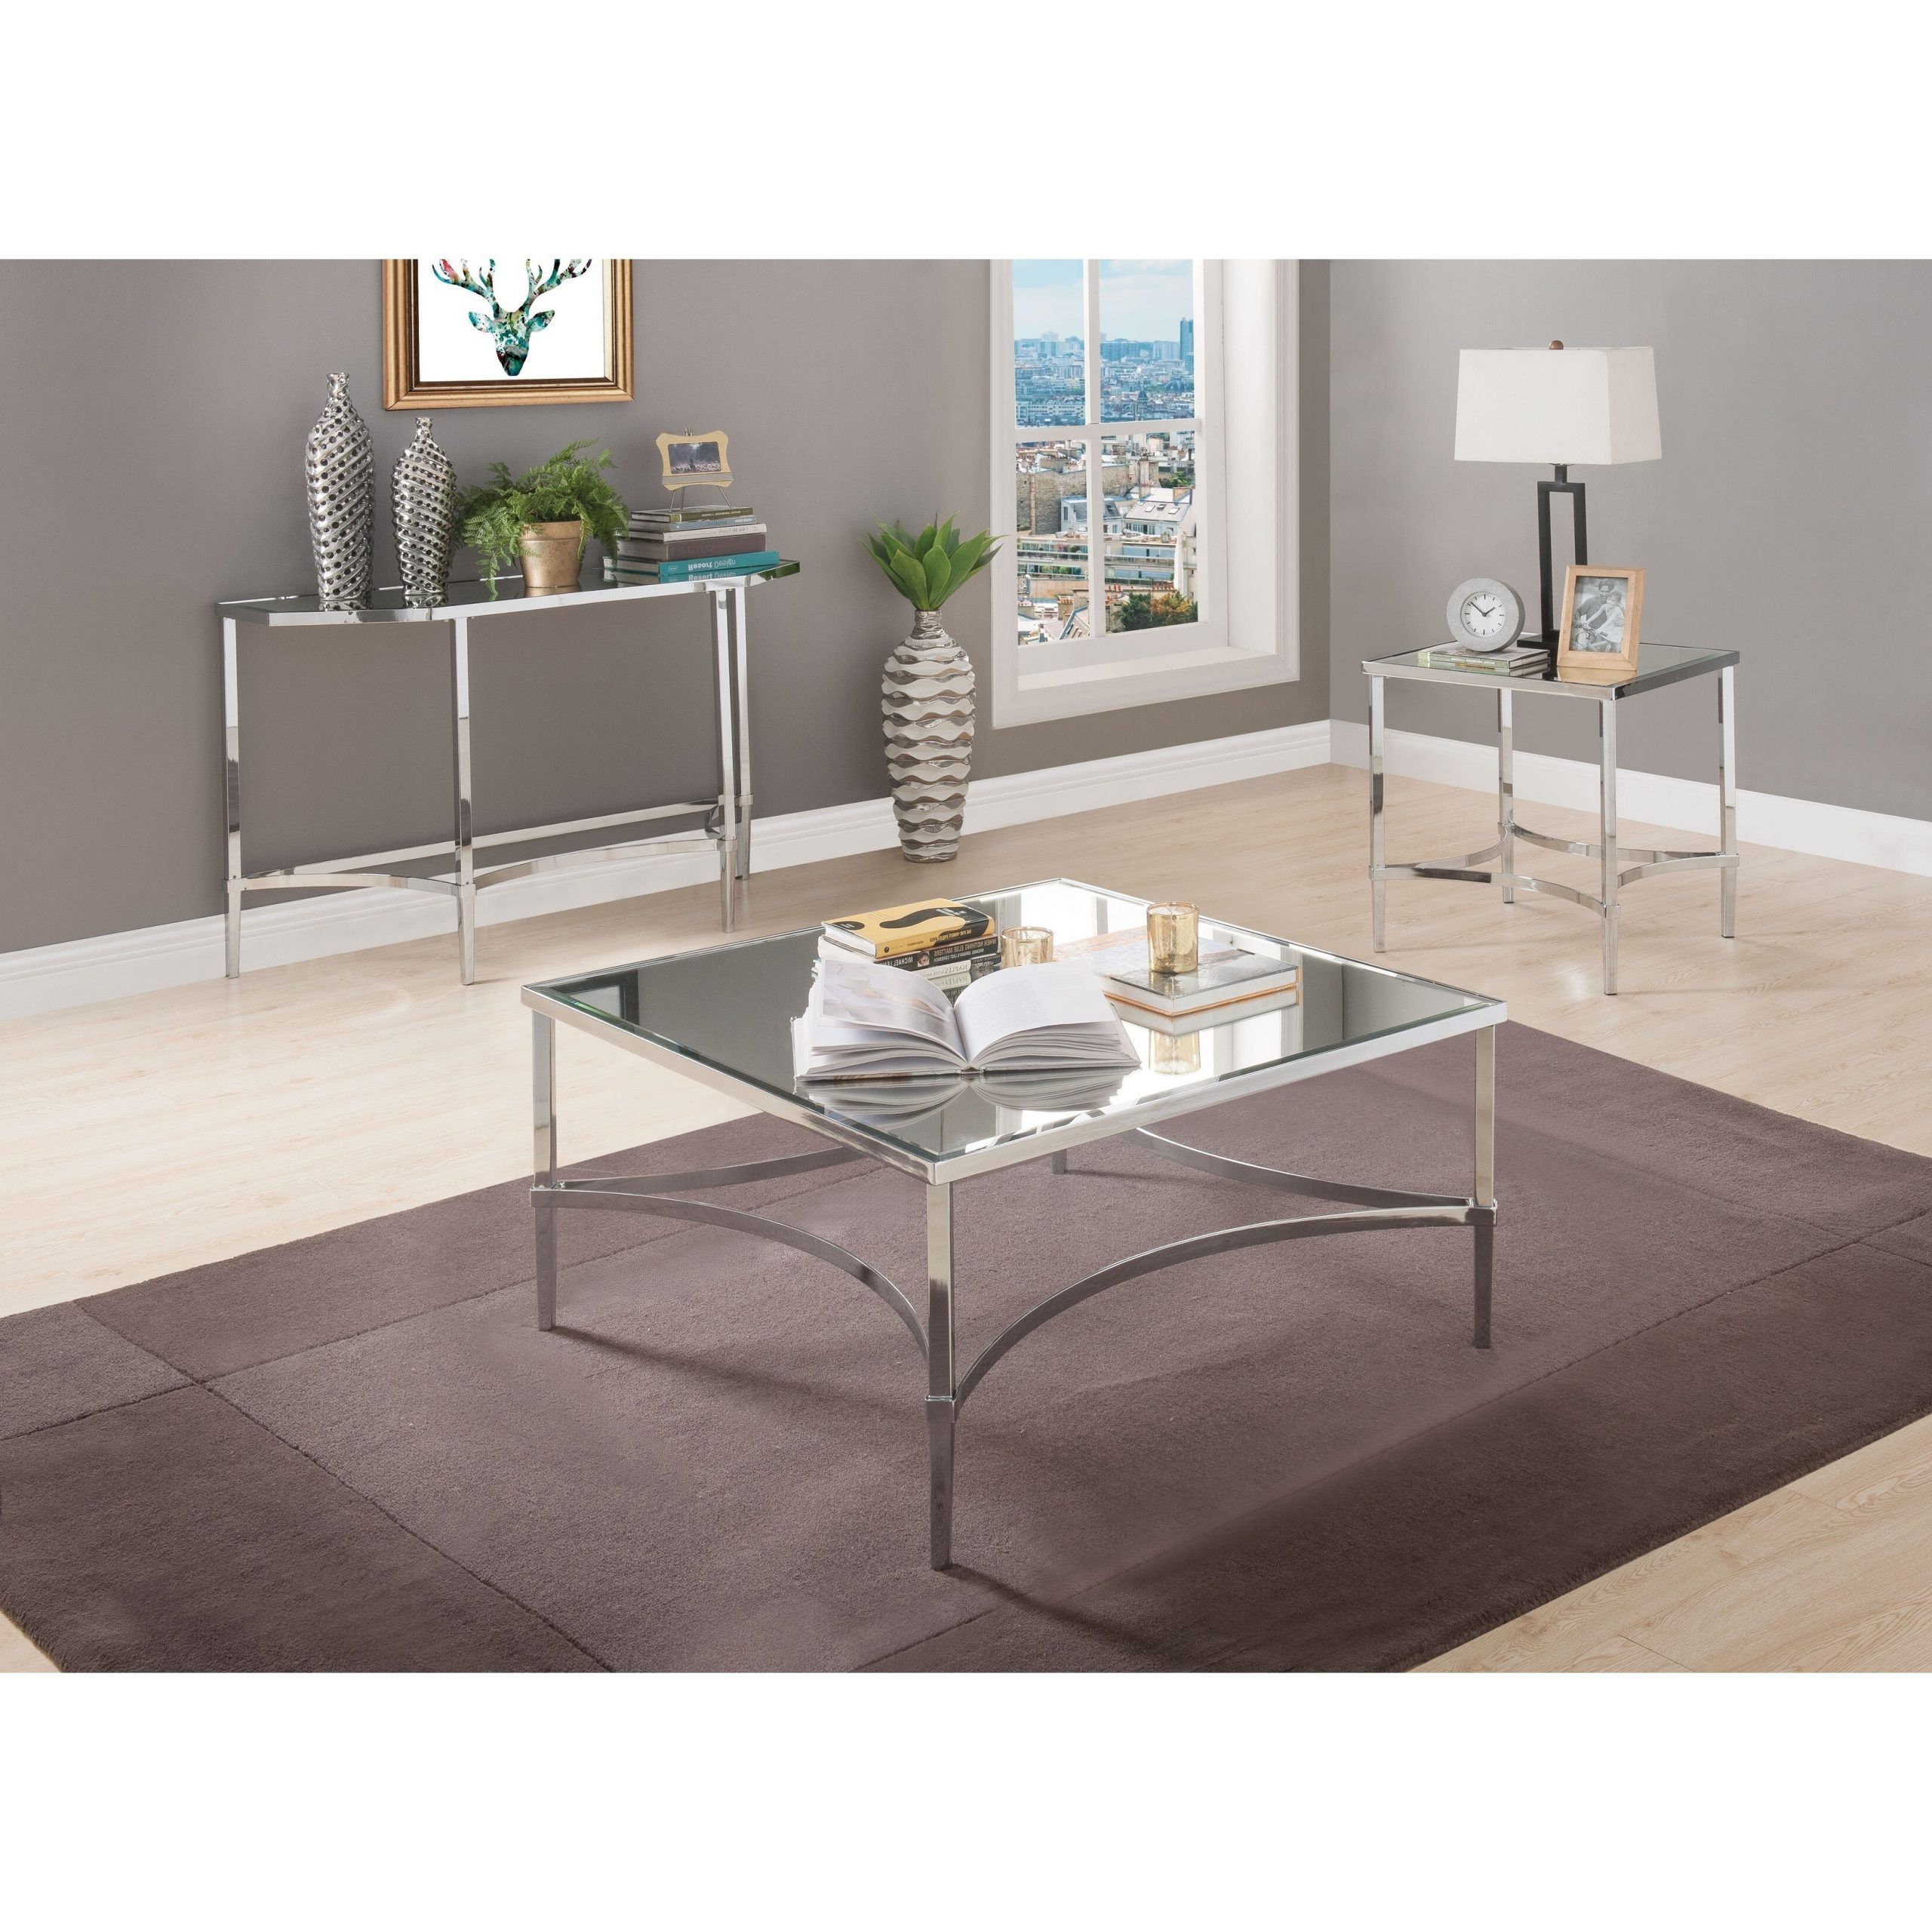 Silver Mirror And Chrome Coffee Tables With Regard To Most Current Acme Petunia Coffee Table In Chrome And Mirrored Silver Modern (View 10 of 10)